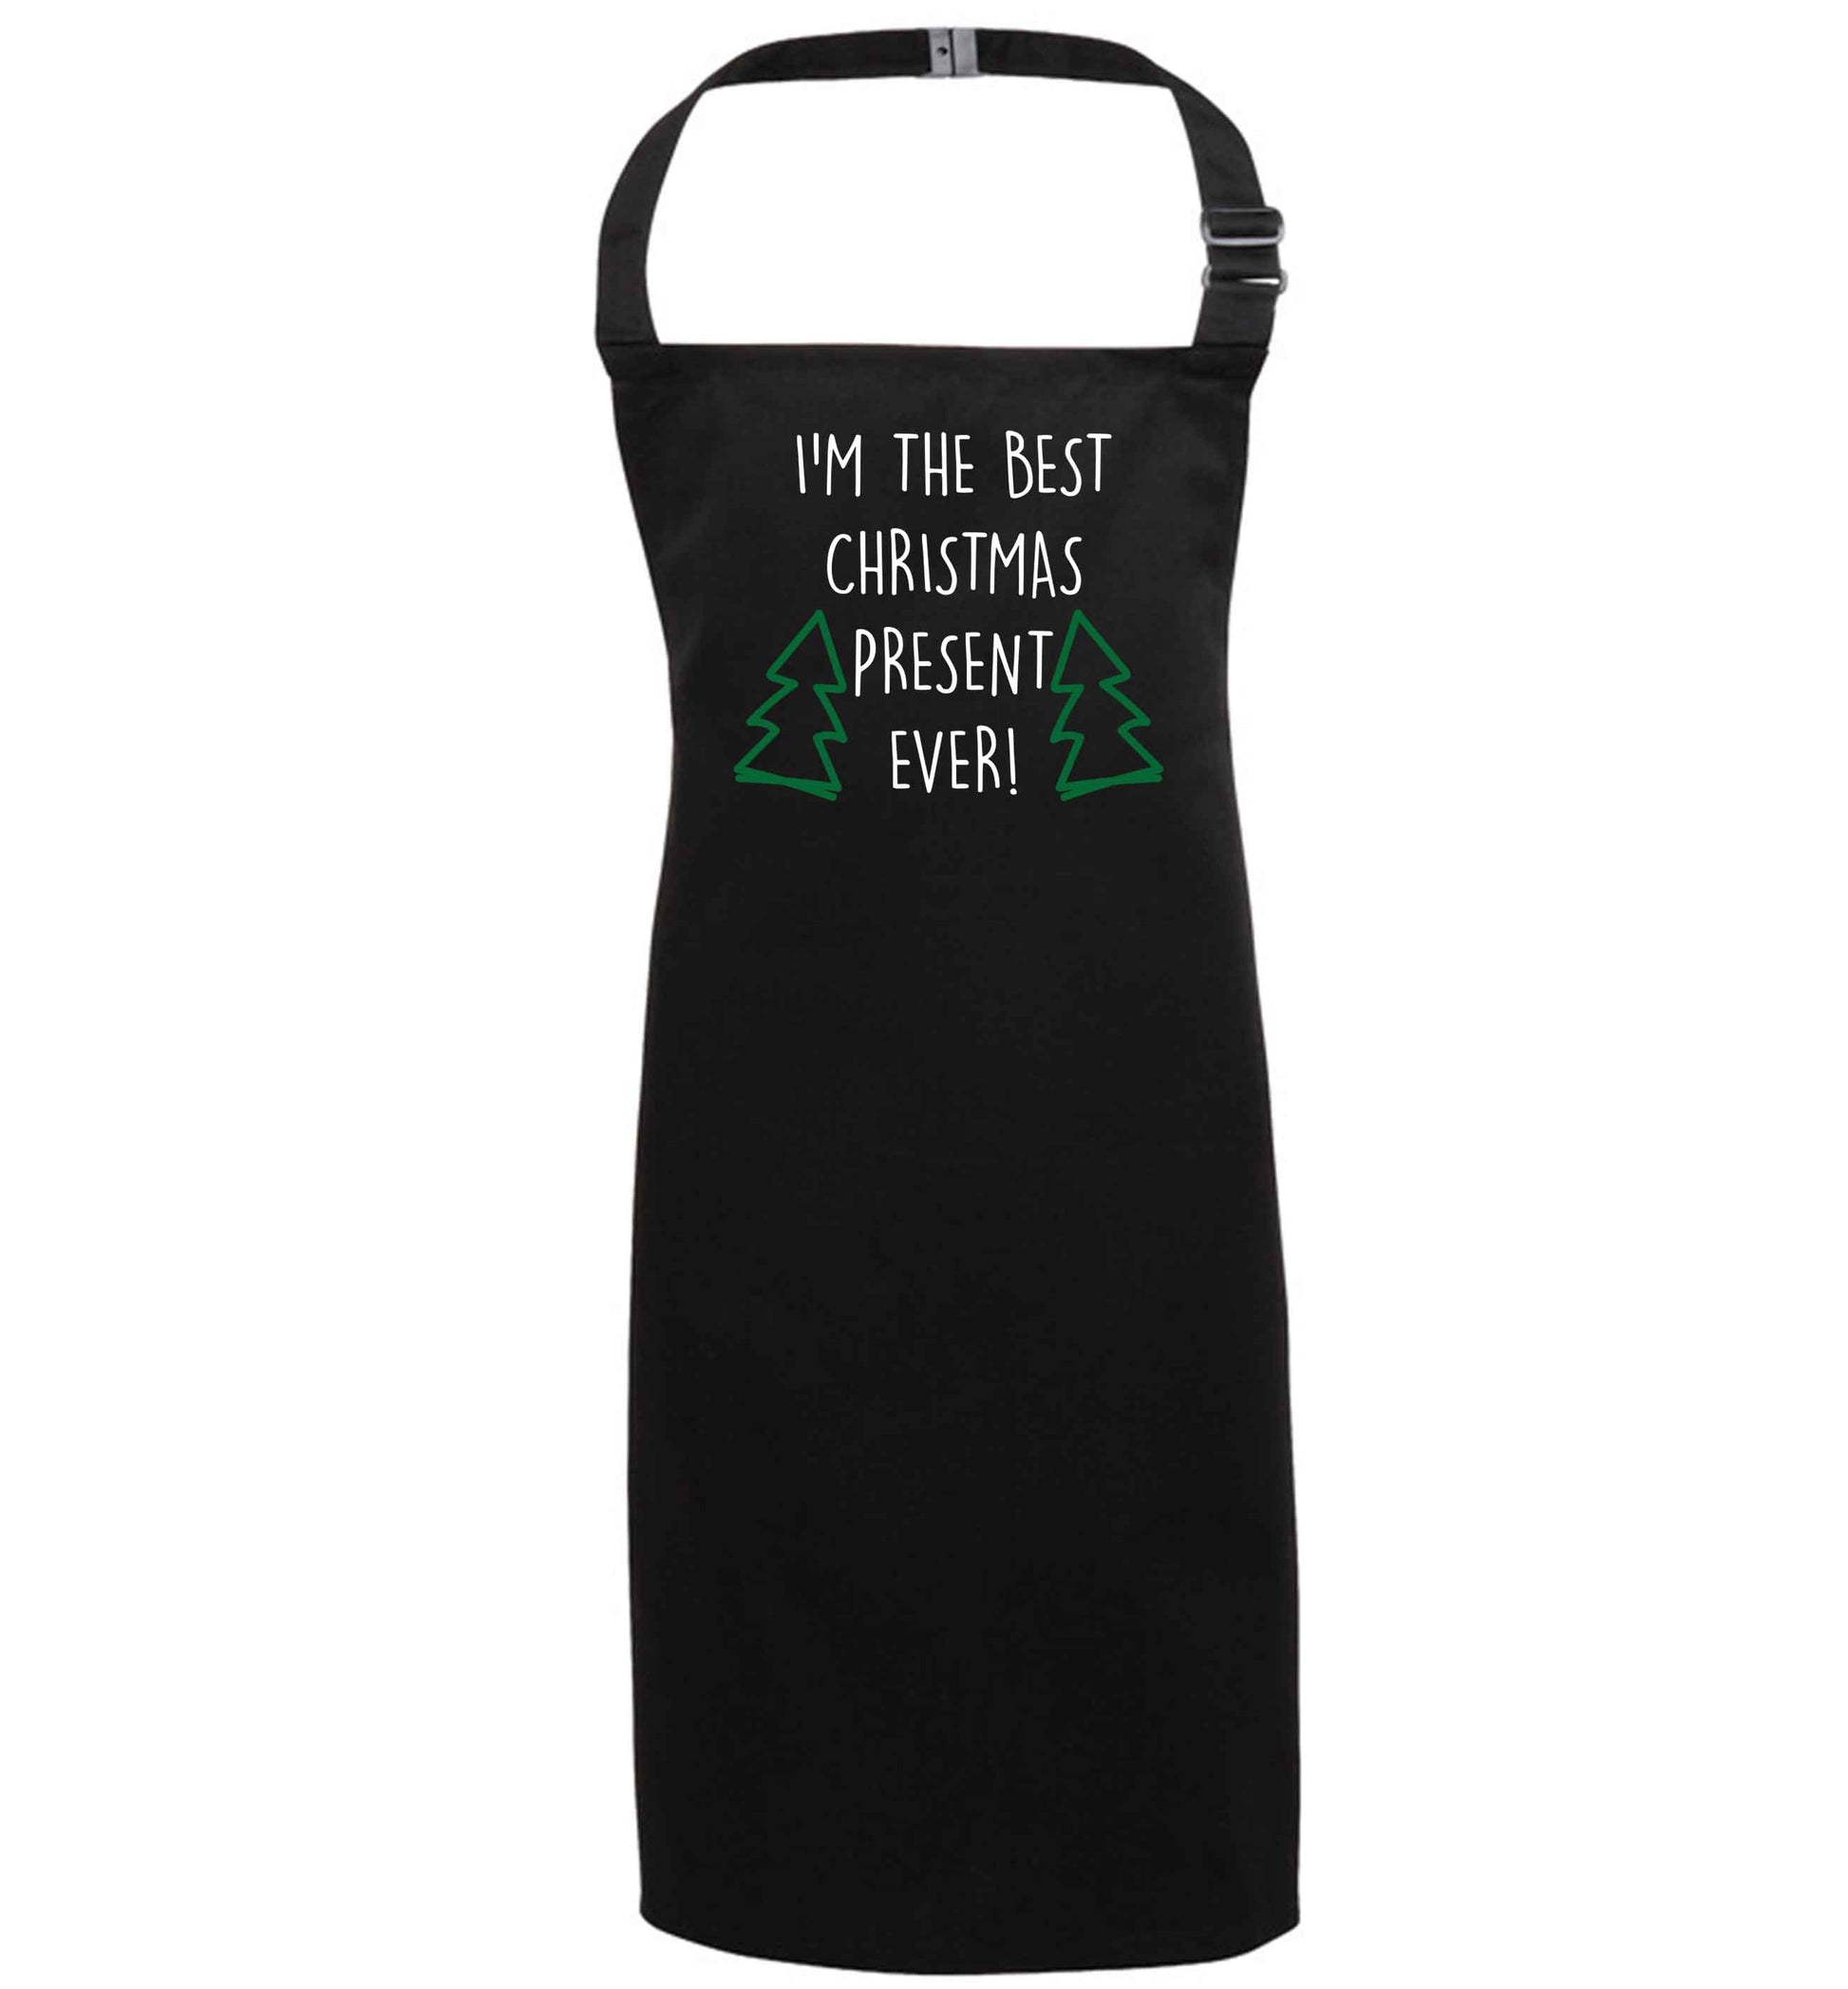 I'm the best Christmas present ever black apron 7-10 years